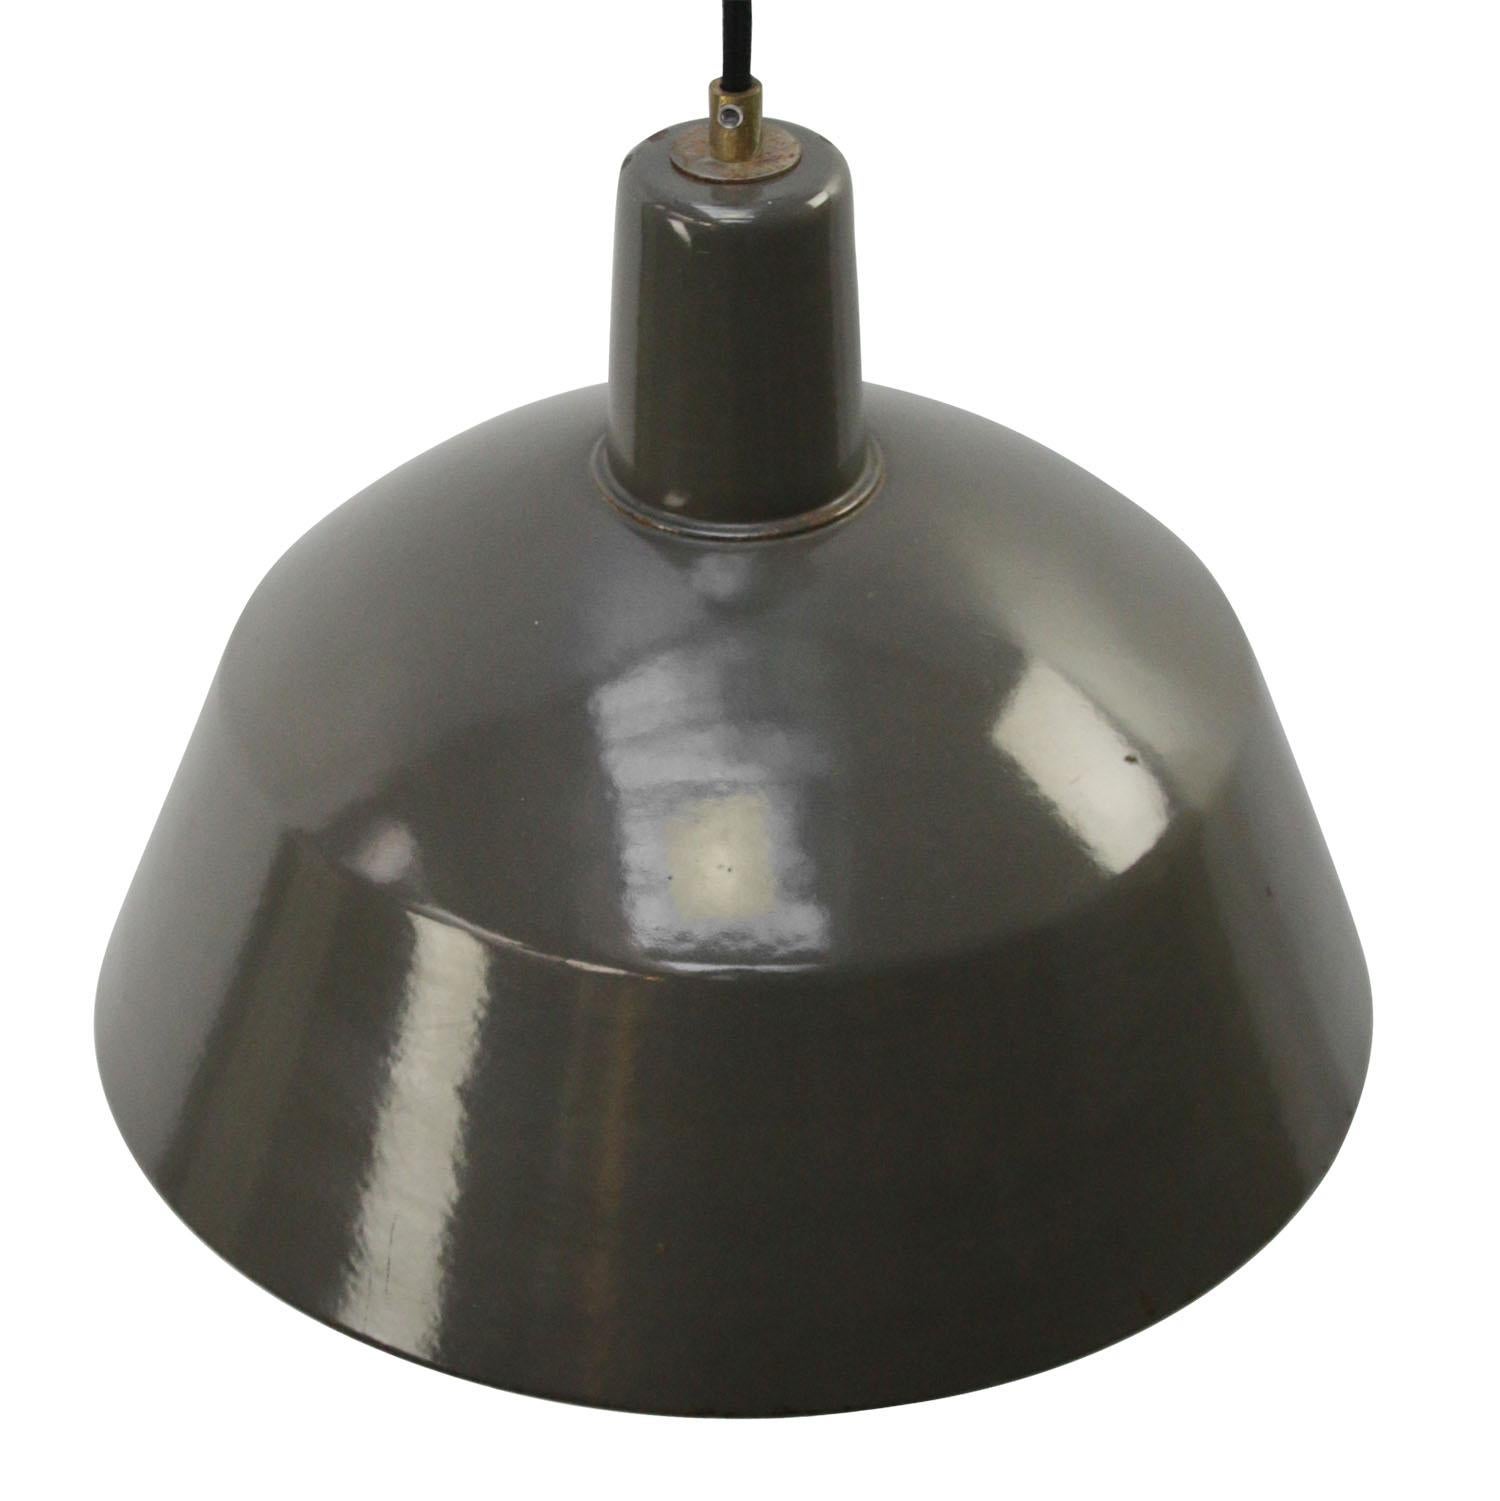 Factory hanging lamp
Brown enamel with white type, white interior

Weight: 2.00 kg / 4.4 lb

Priced per individual item. All lamps have been made suitable by international standards for incandescent light bulbs, energy-efficient and LED bulbs.